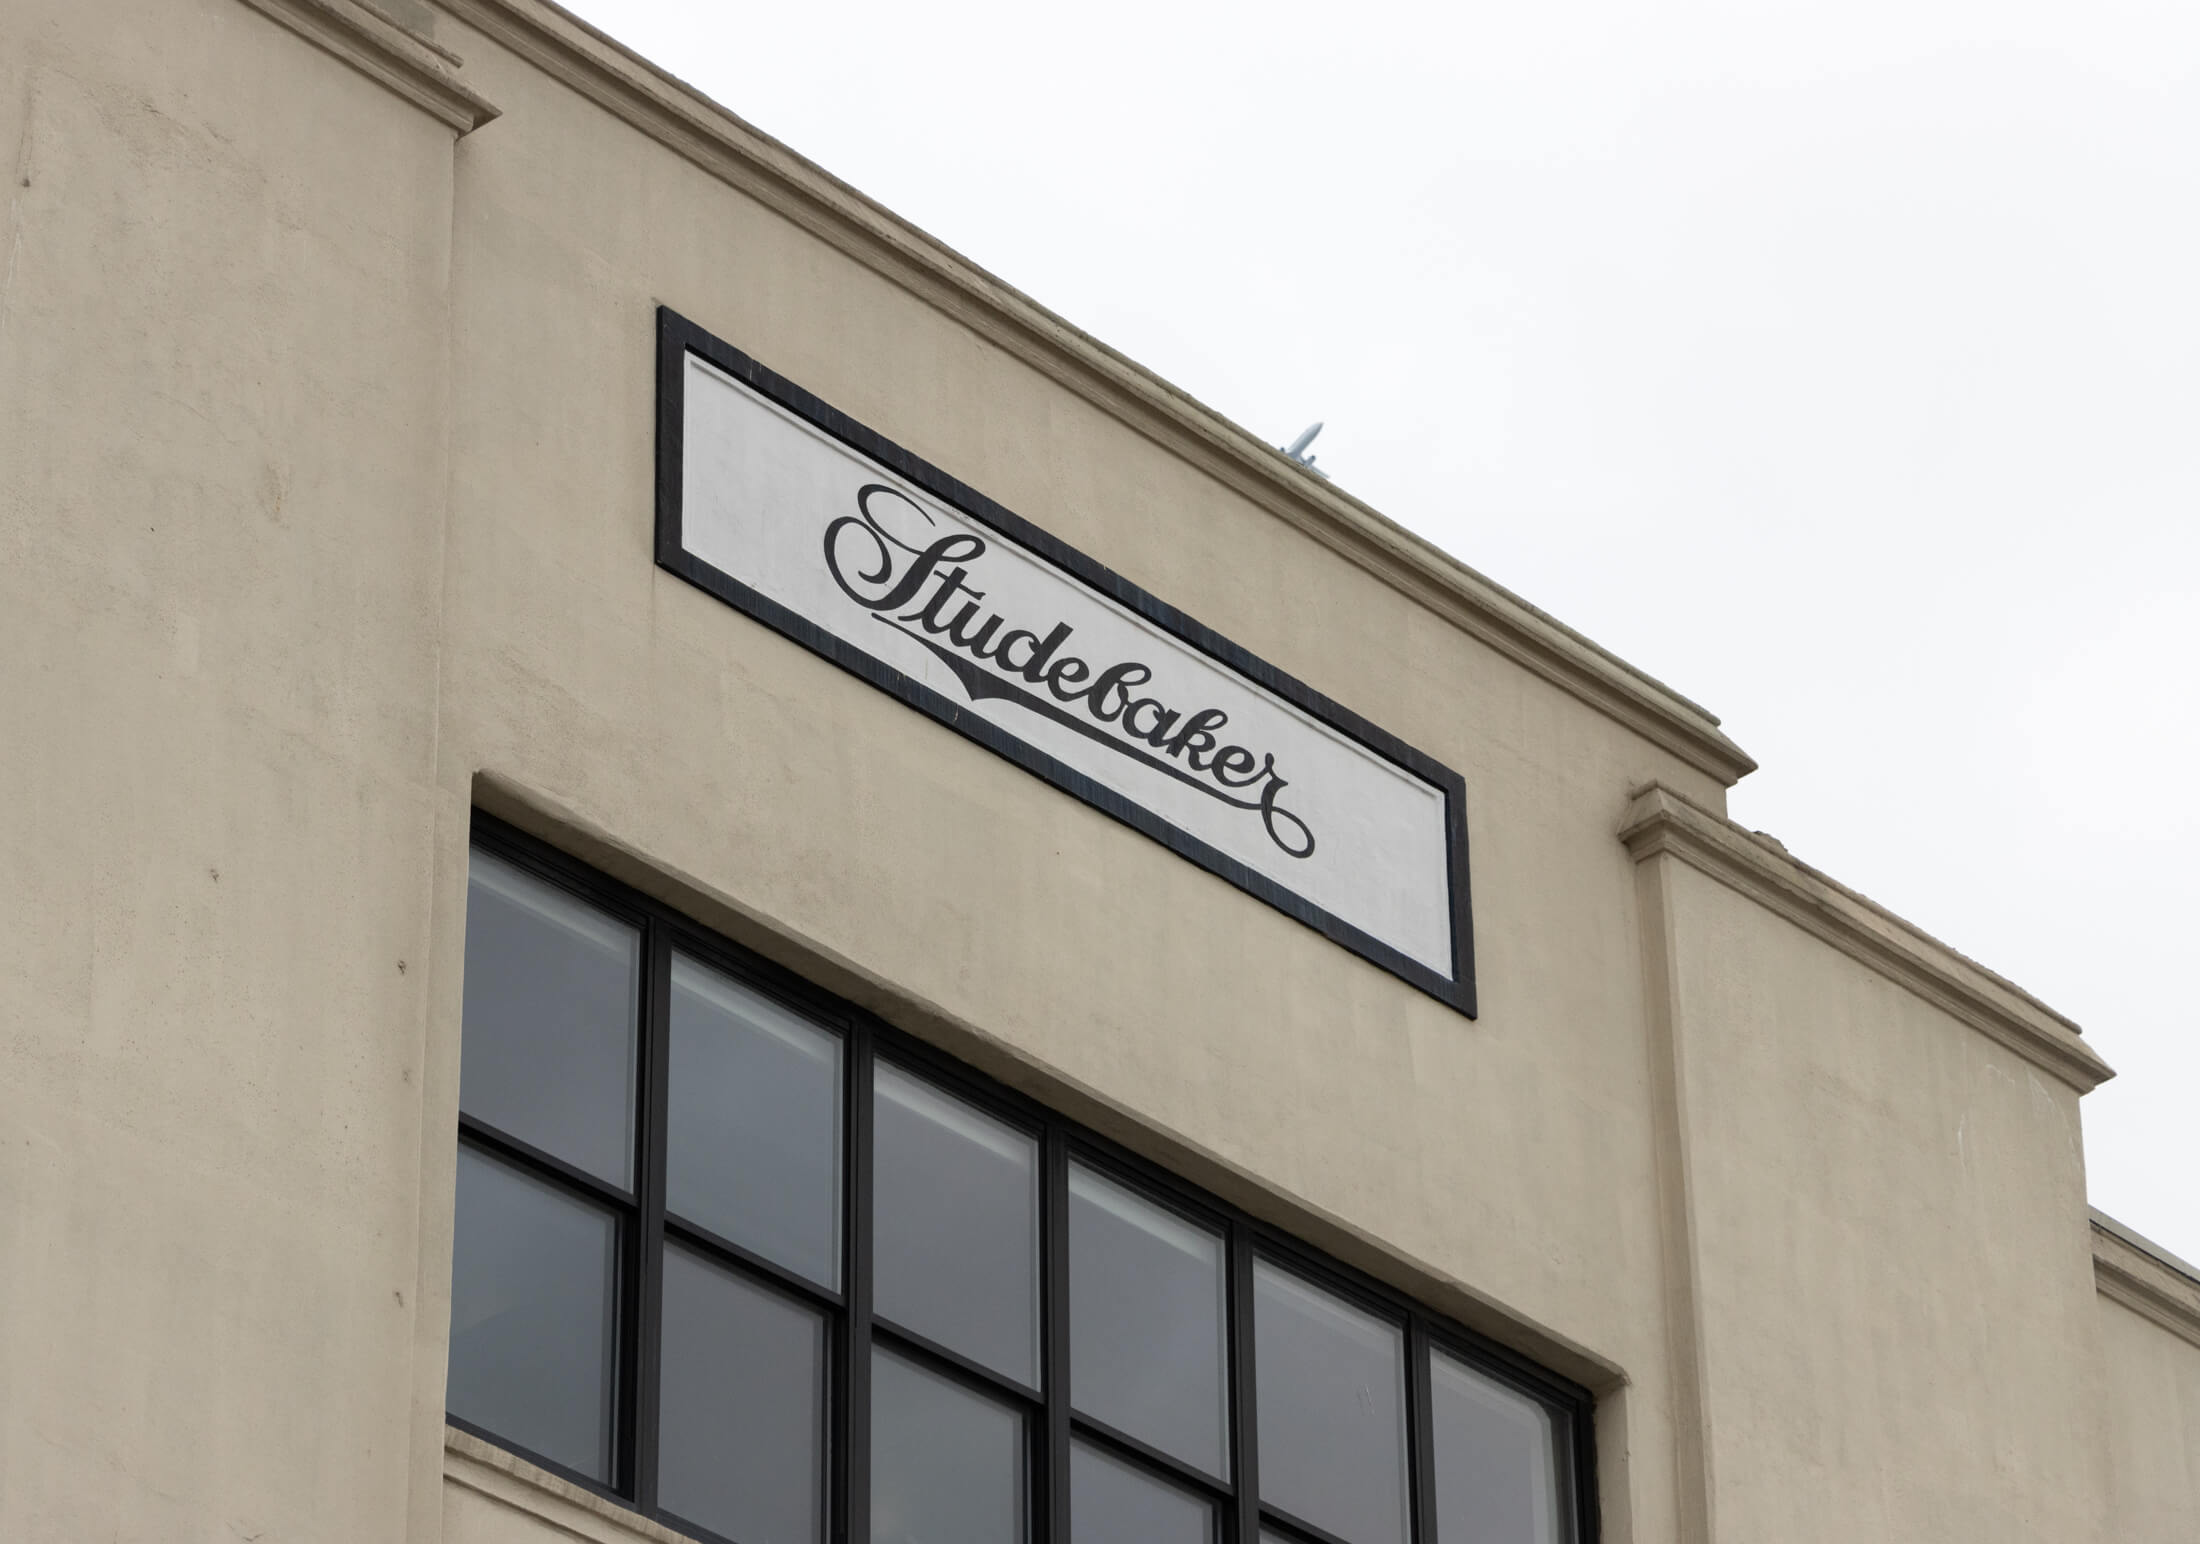 sutdebaker sign on the top of the building